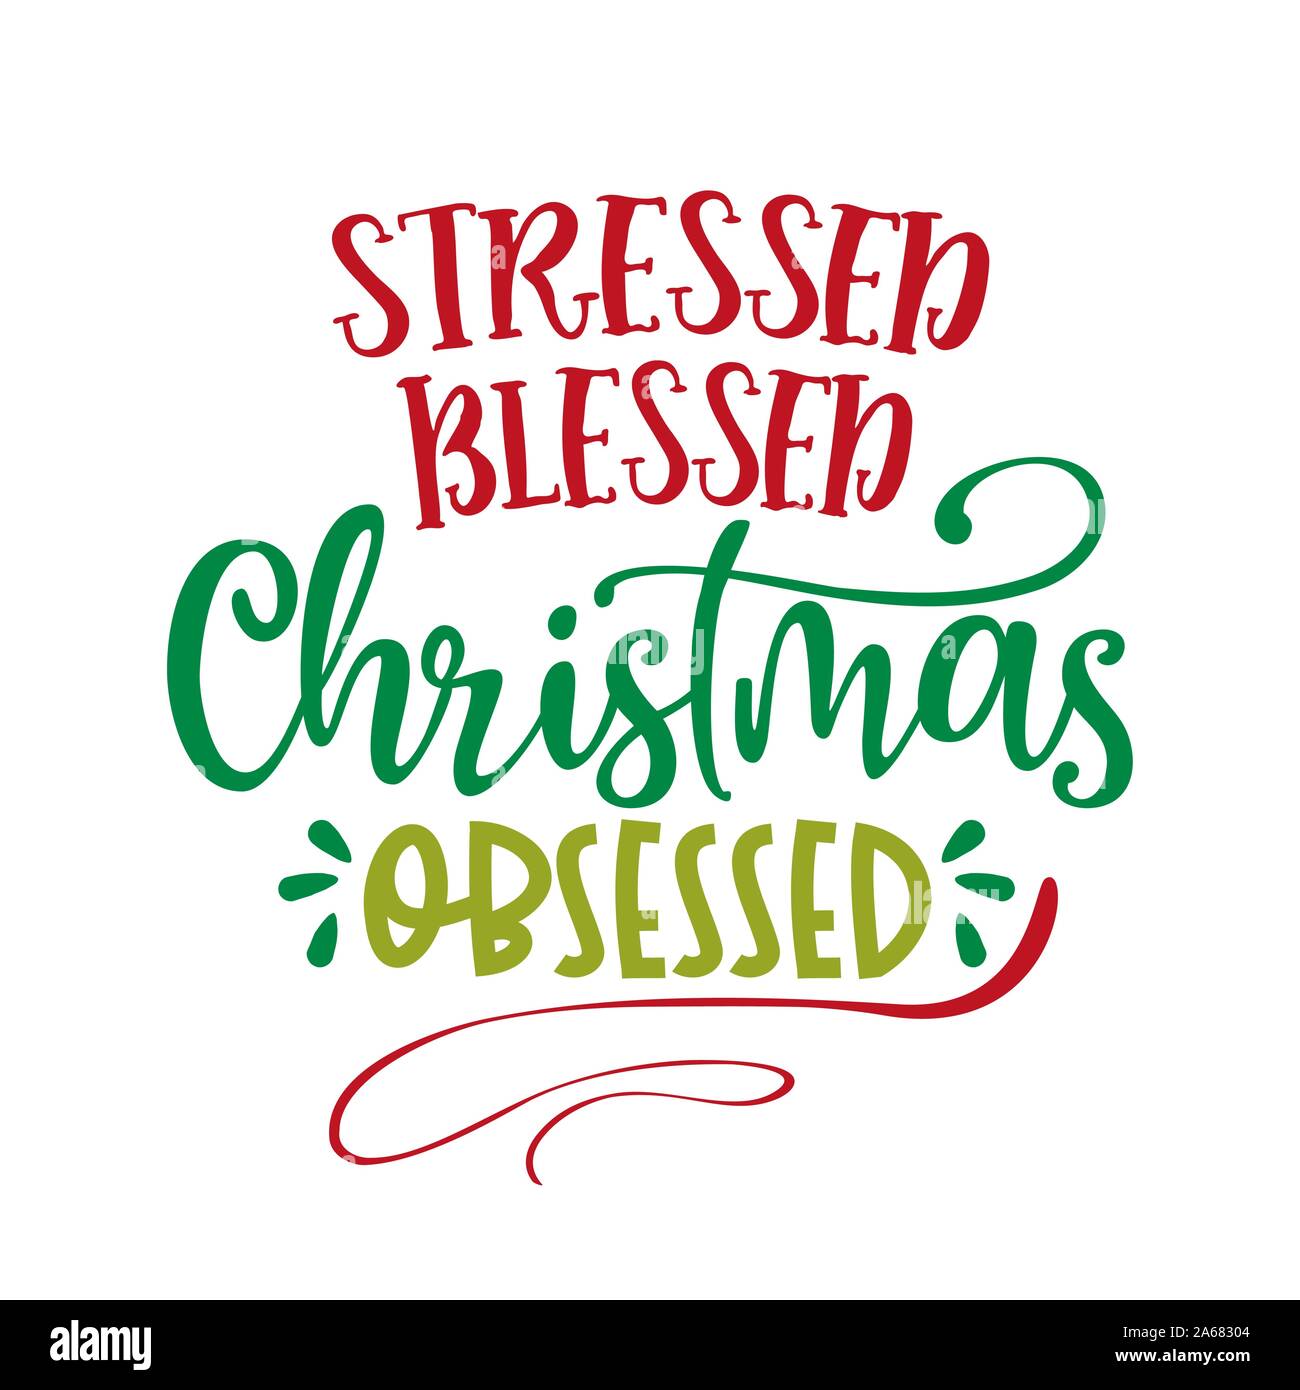 Stressed Blessed Christmas Obsessed - Xmas calligraphy phrase. Hand drawn lettering for Xmas greetings cards, invitations. Good for t-shirt, mug, scra Stock Vector